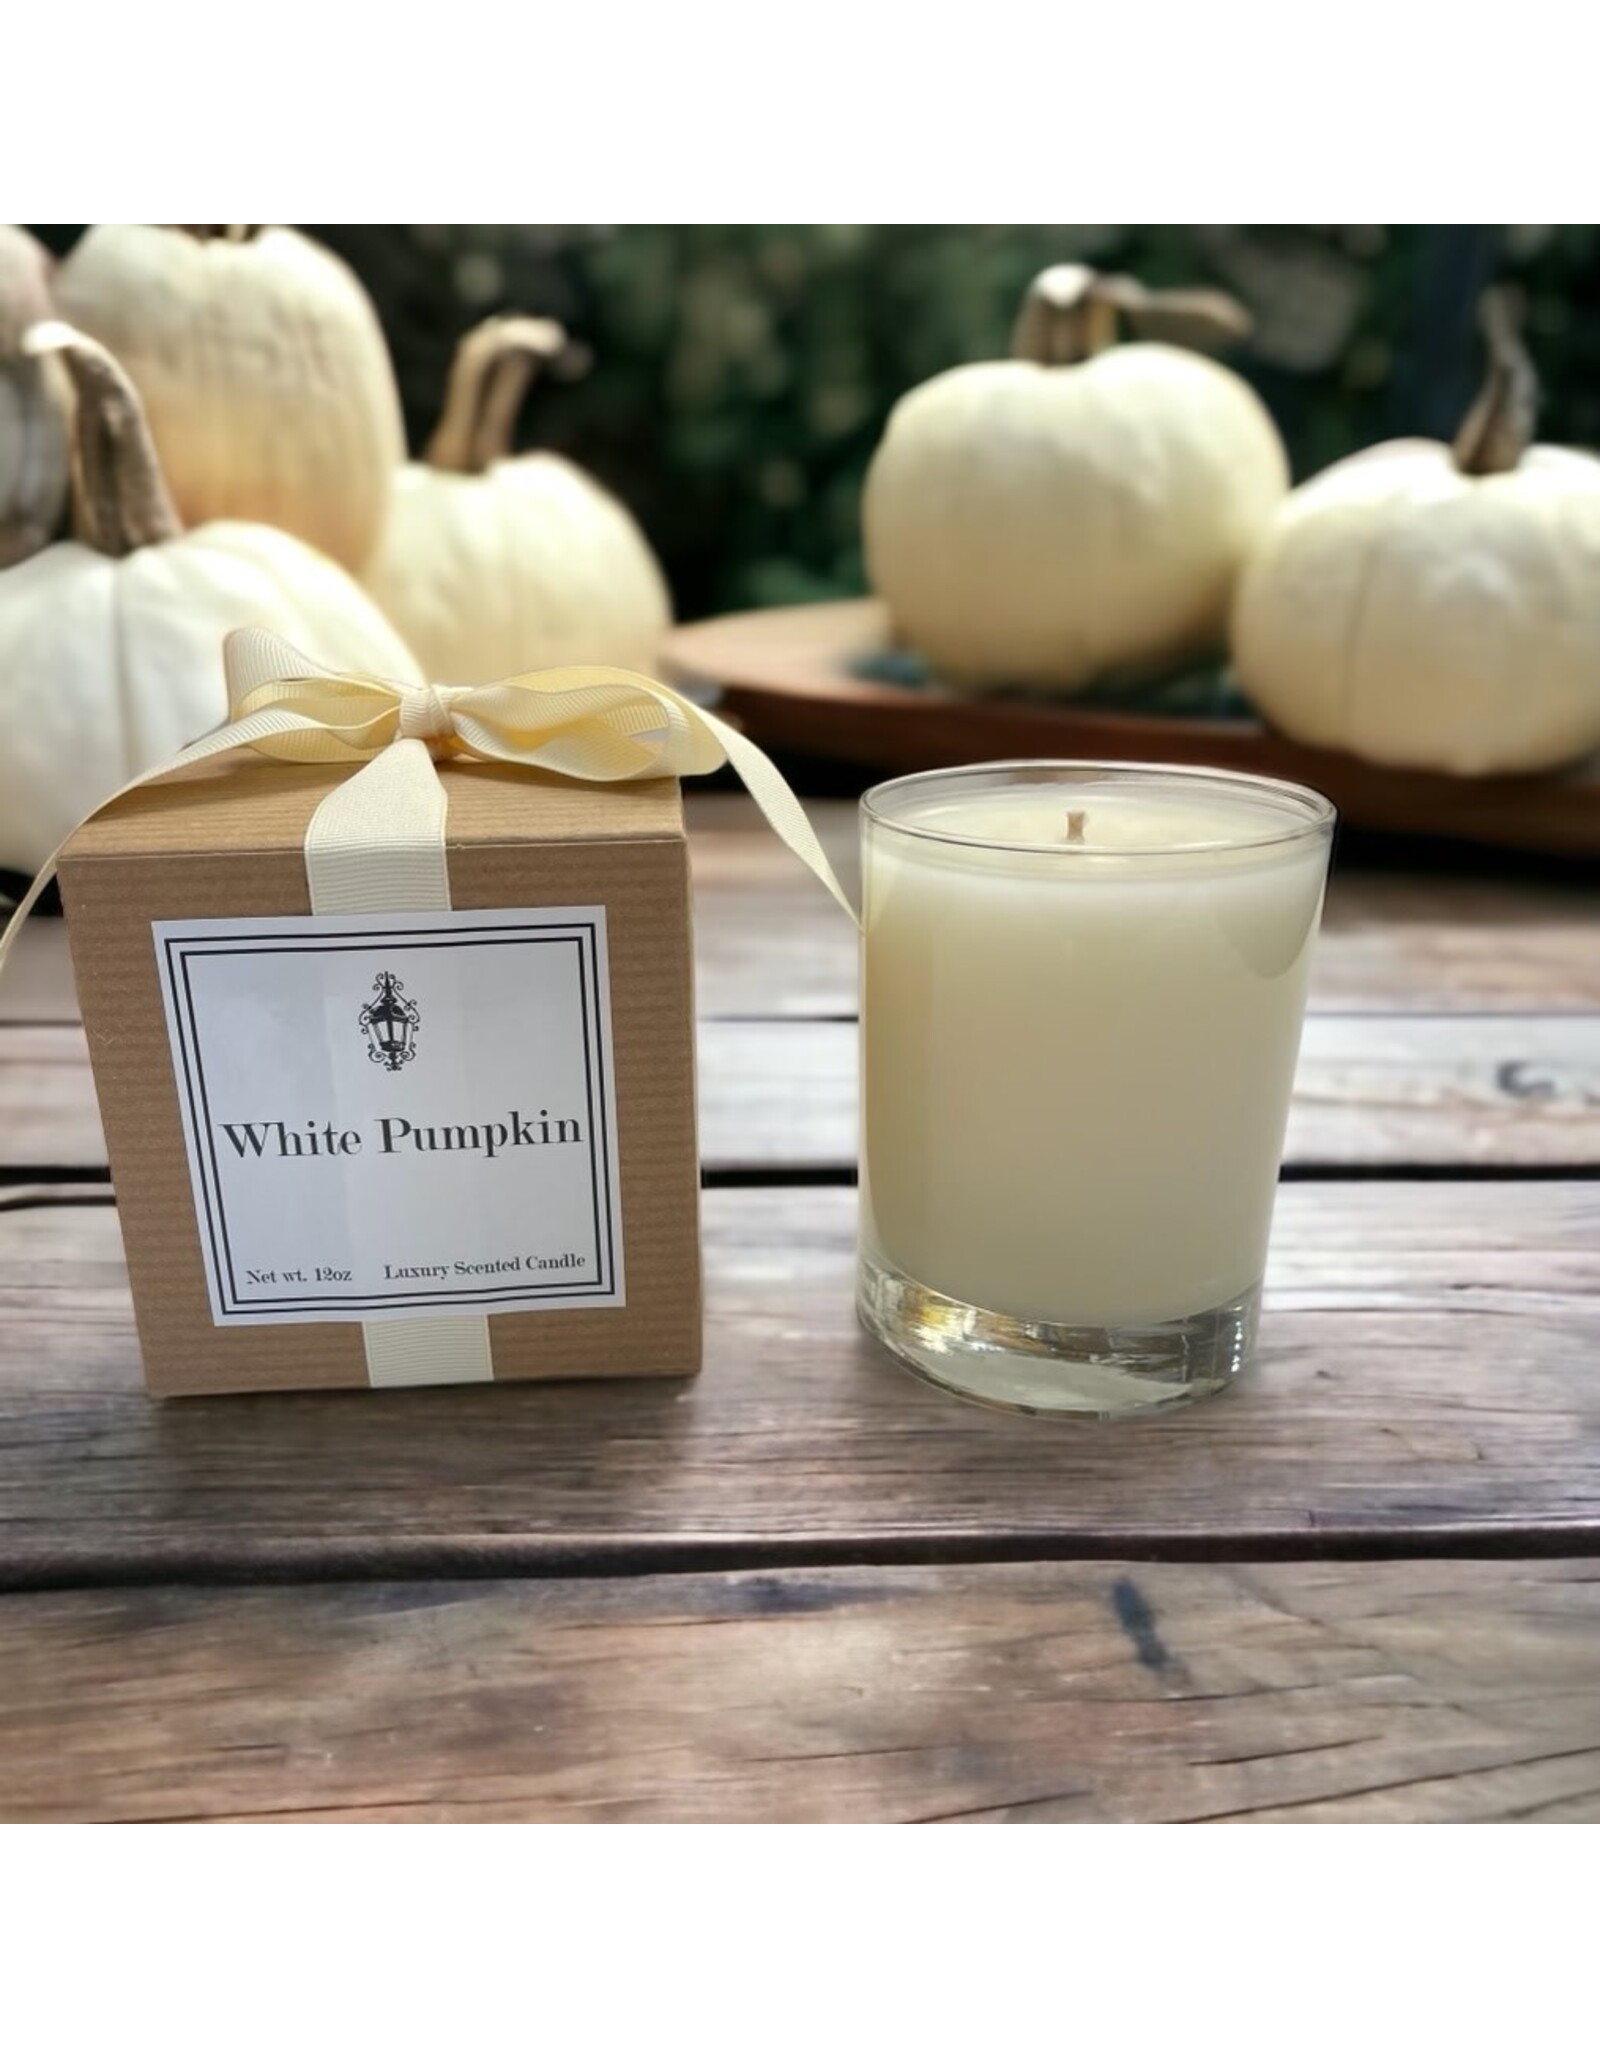 Southern Lights Candle White Pumpkin Candle